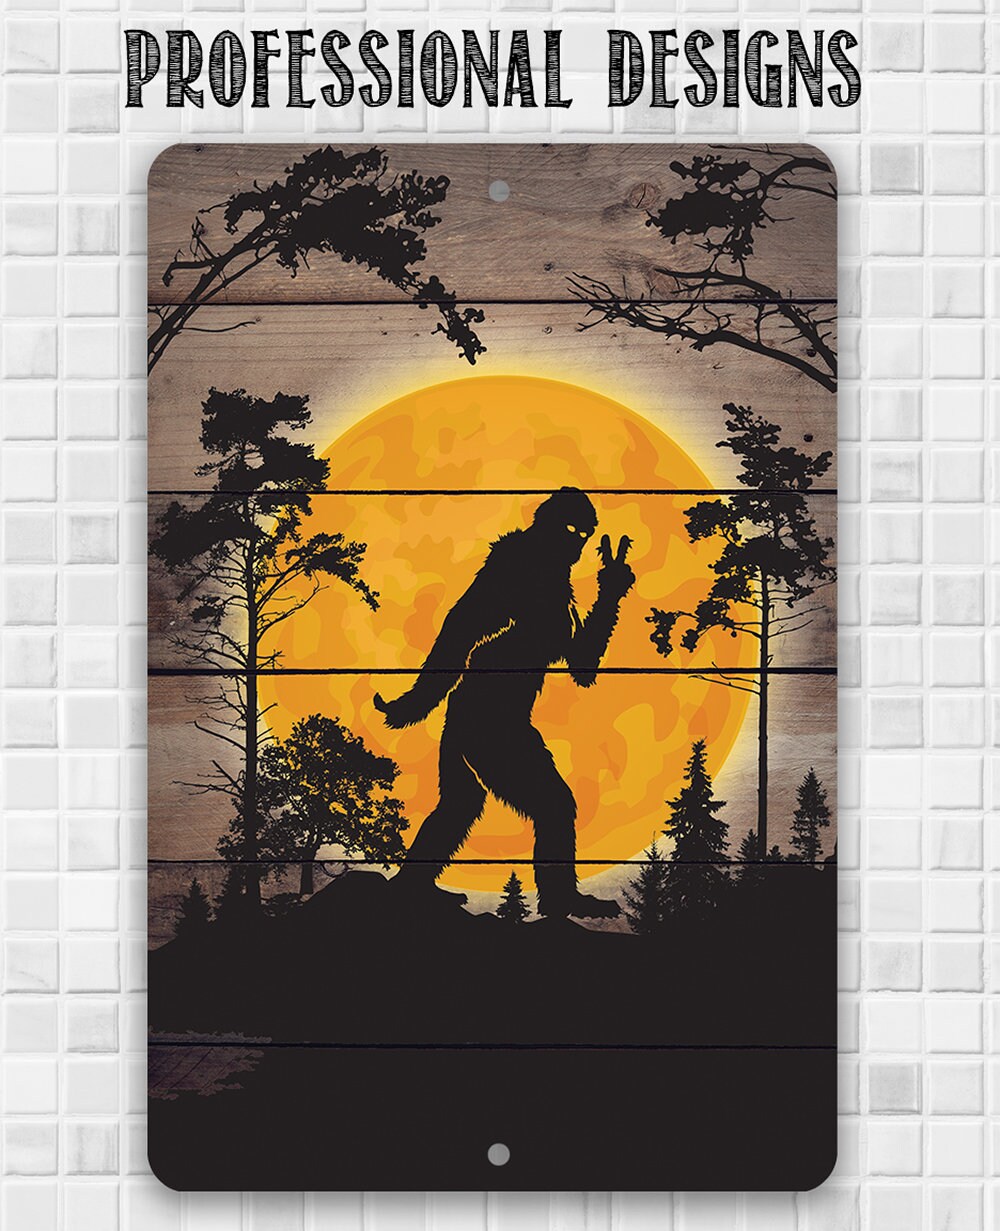 Tin - Metal Sign - Big Foot in the Woods Peace Sign - 8"x12"/12"x18" Use Indoor/Outdoor - Funny Room Decor for Cabin/Fence